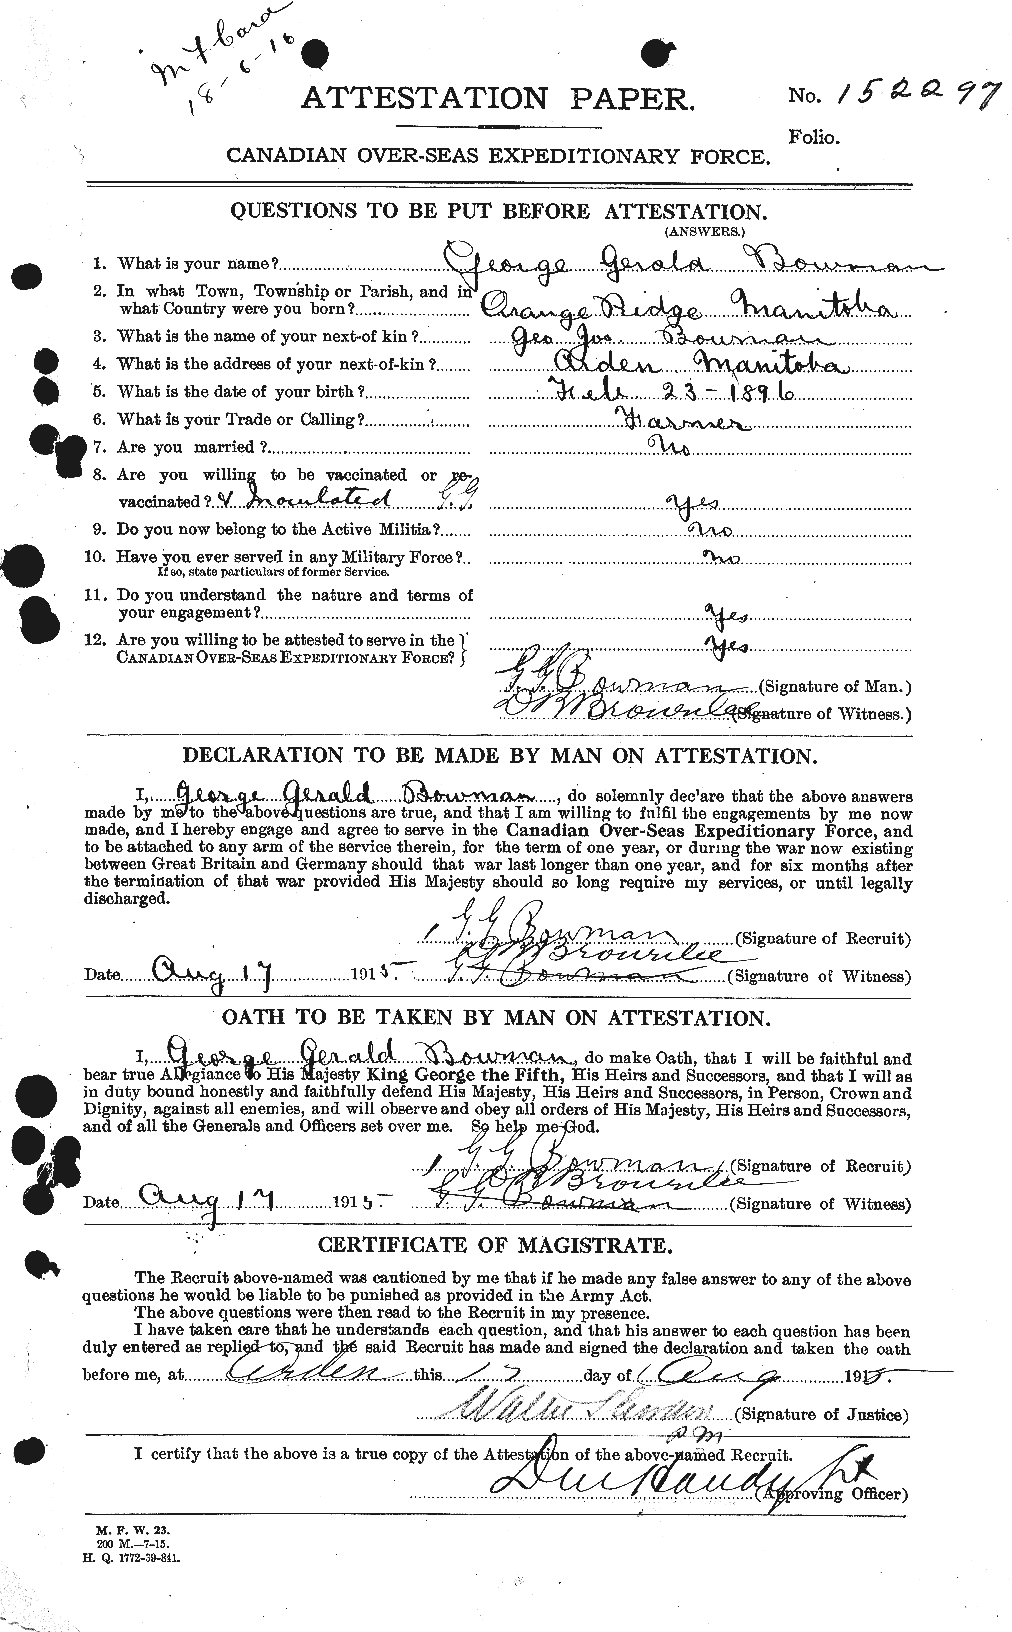 Personnel Records of the First World War - CEF 255059a